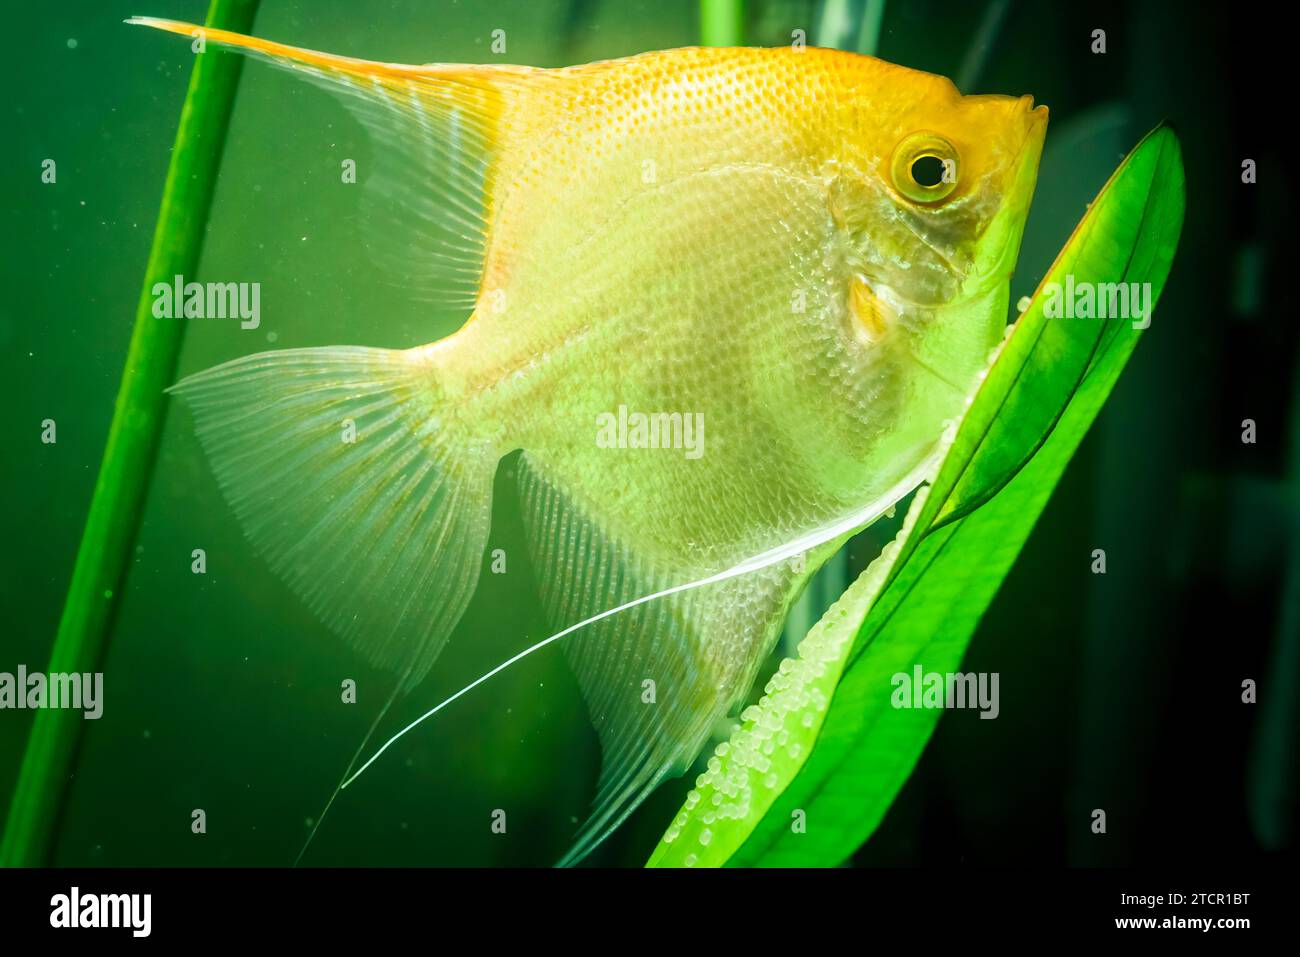 Gold Pterophyllum Scalare in aqarium water, yellow angelfish guarding eggs. Roe on the leaf Stock Photo